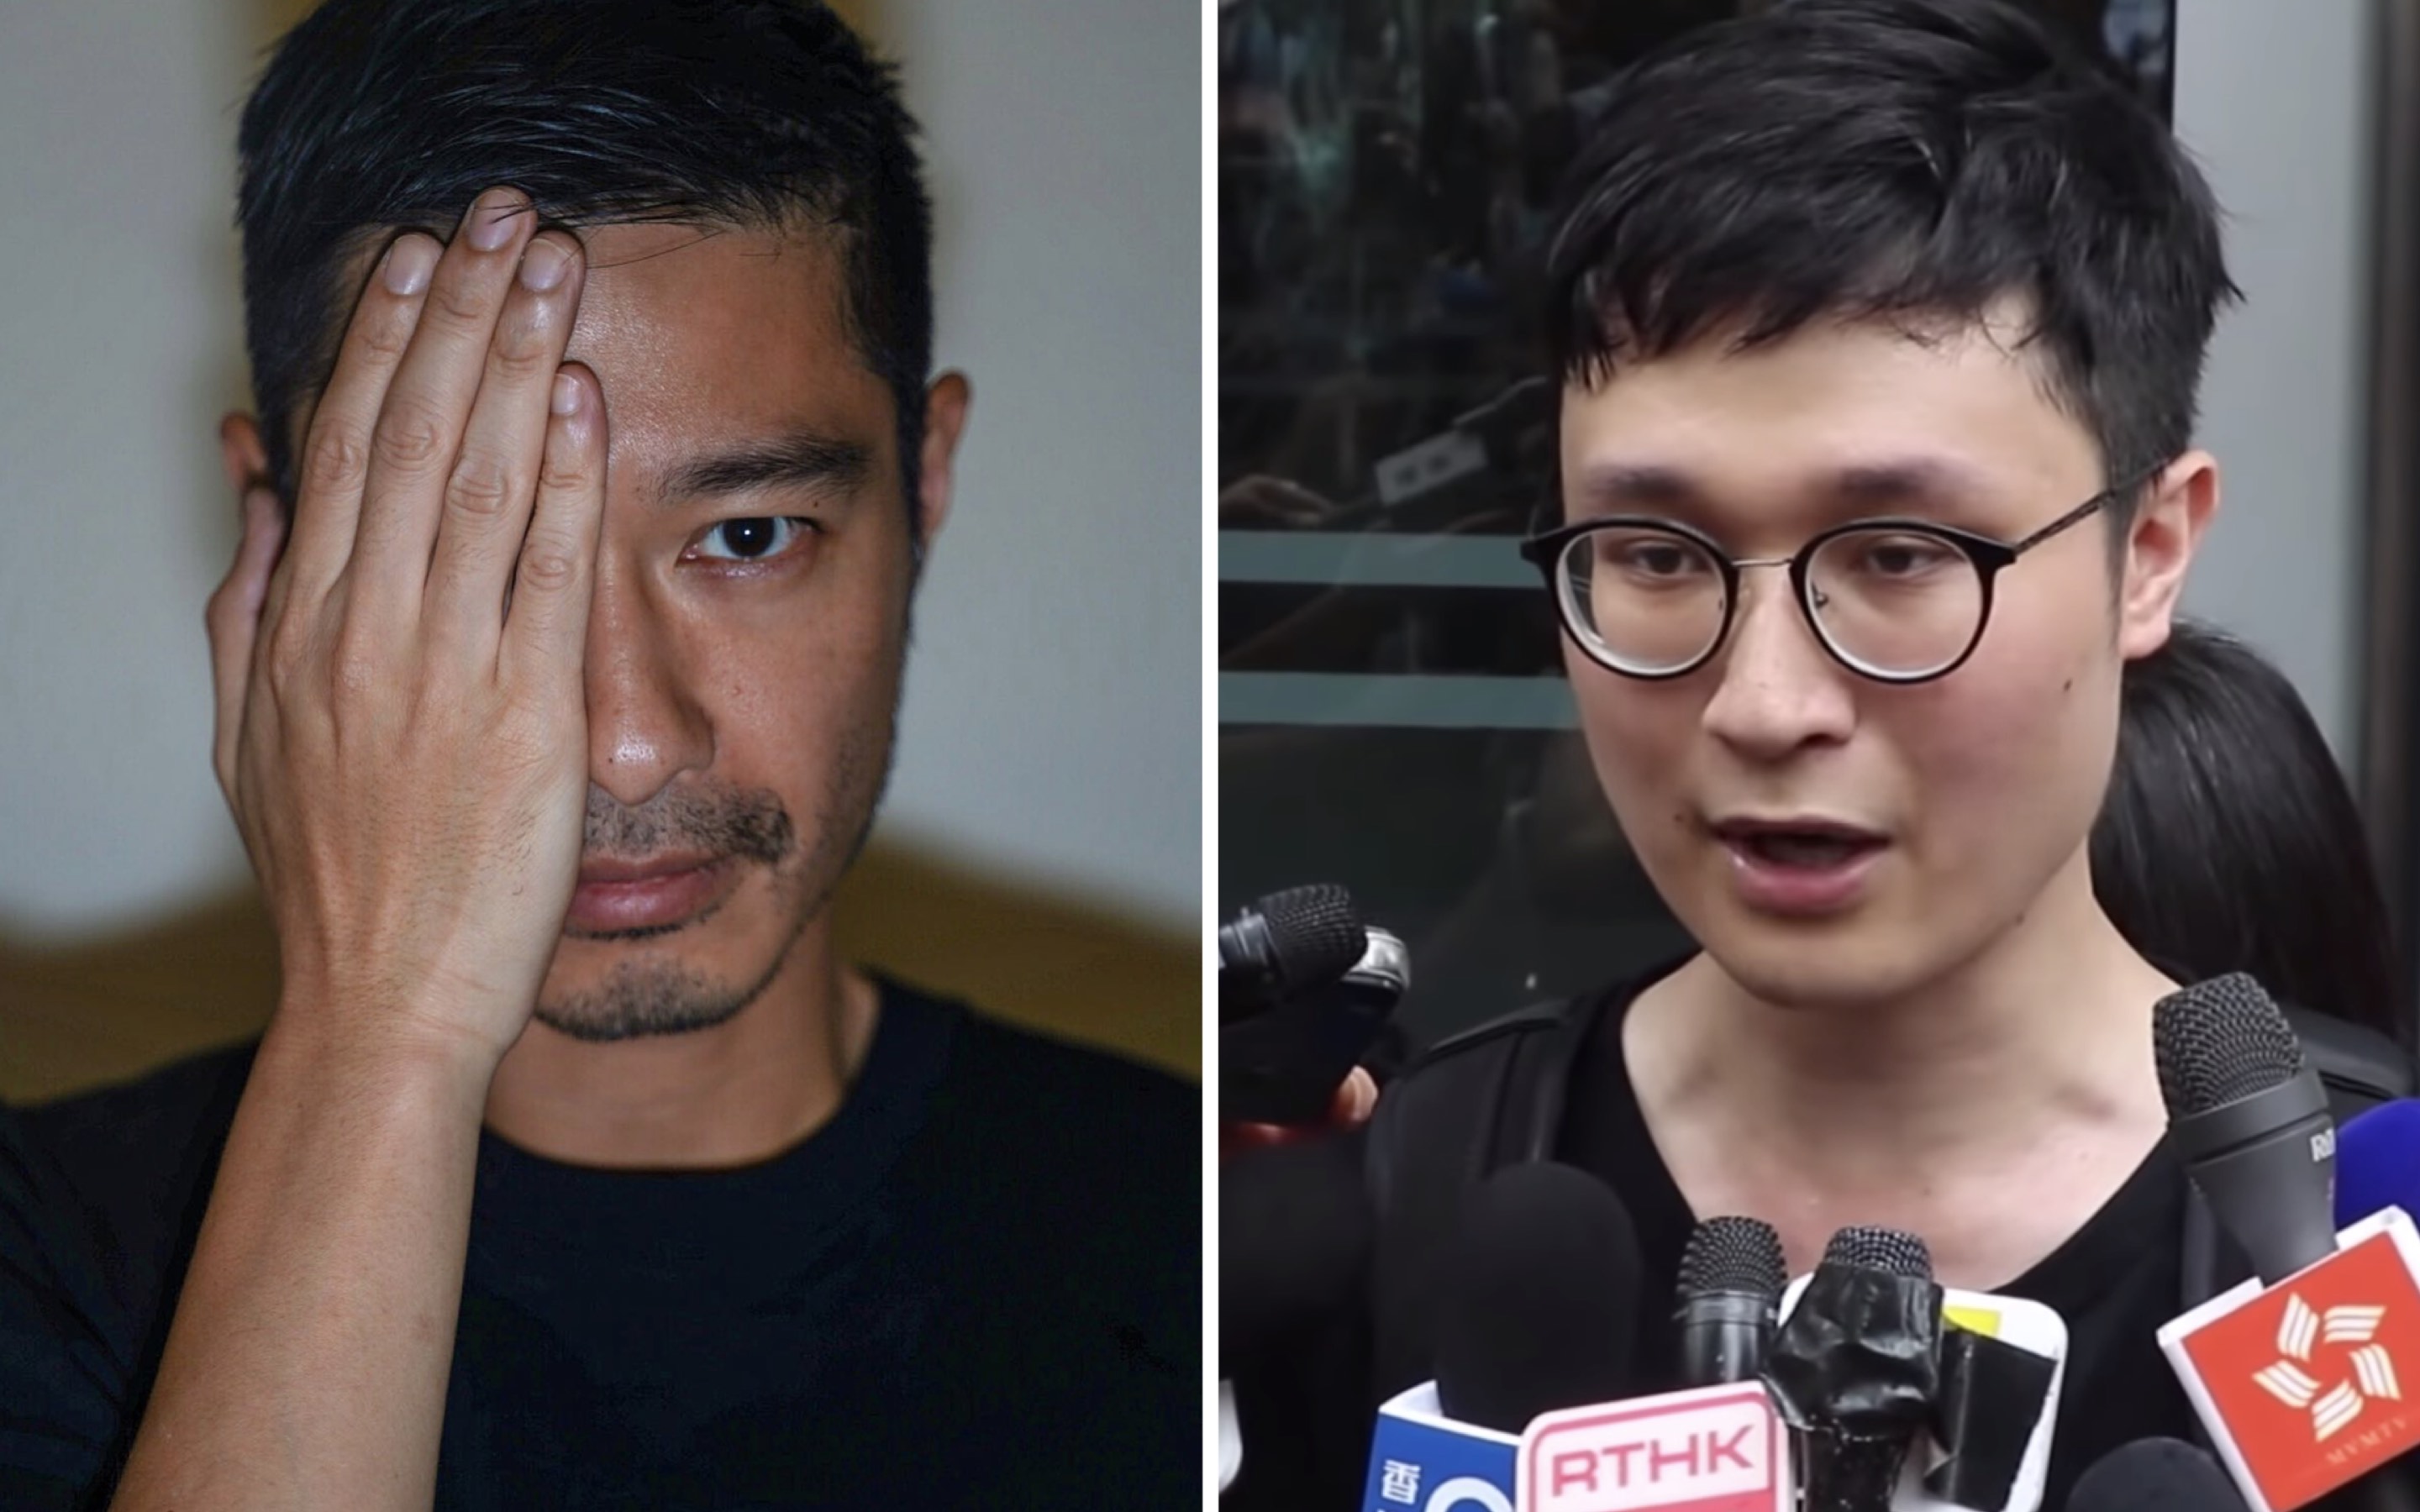 Actor Gregory Wong (left) and pro-democracy activist (right) were arrested this morning for in connection with the July 1 protest which saw demonstrators storm into the Legislative Council on July 1. Photos and screengrabs via Facebook/Gregory Wong and YouTube.